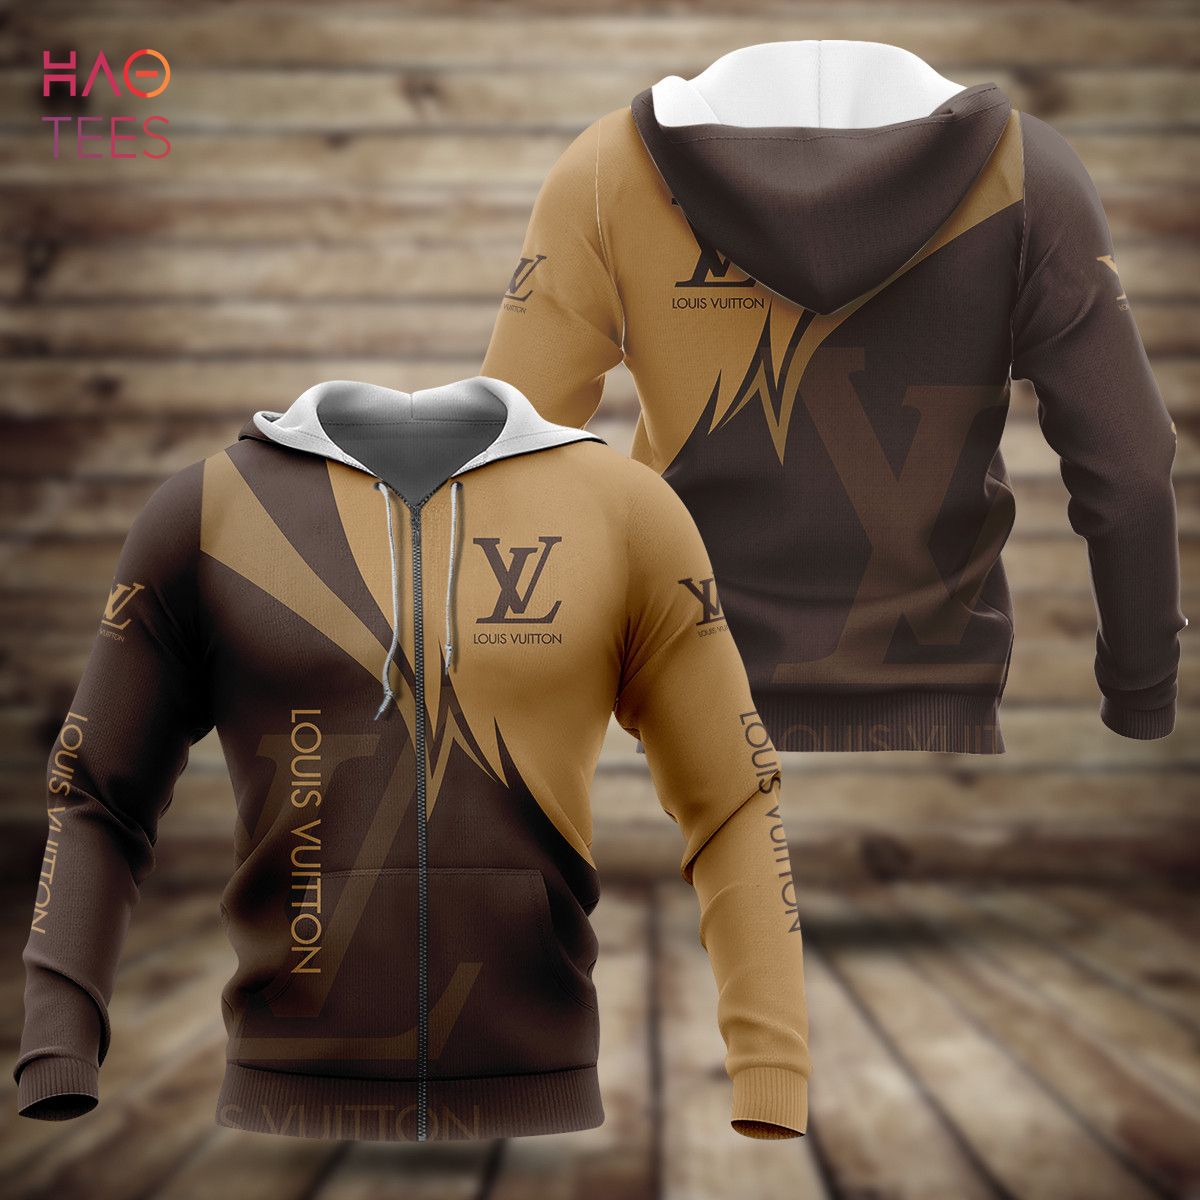 Vintage Louis vuitton brown unisex hoodie and long pants luxury brand hoodie  outfit Best Gift For Dad - Family Gift Ideas That Everyone Will Enjoy